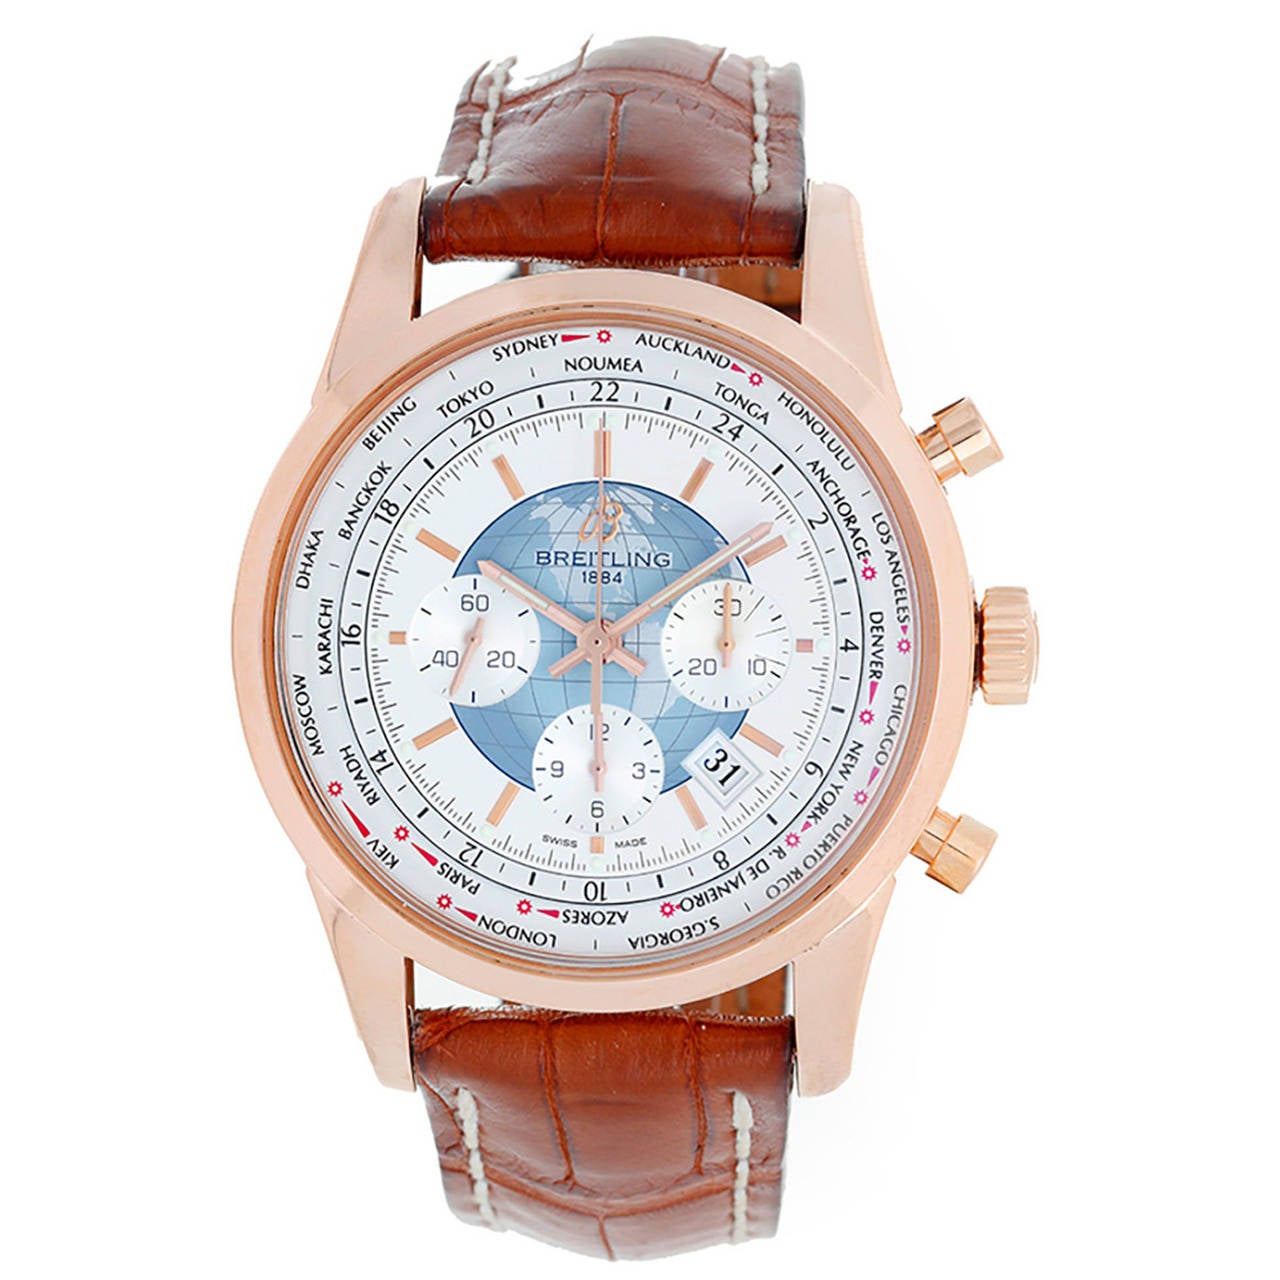 Breitling Rose Gold Transocean Chronograph Unitime World Time Watch